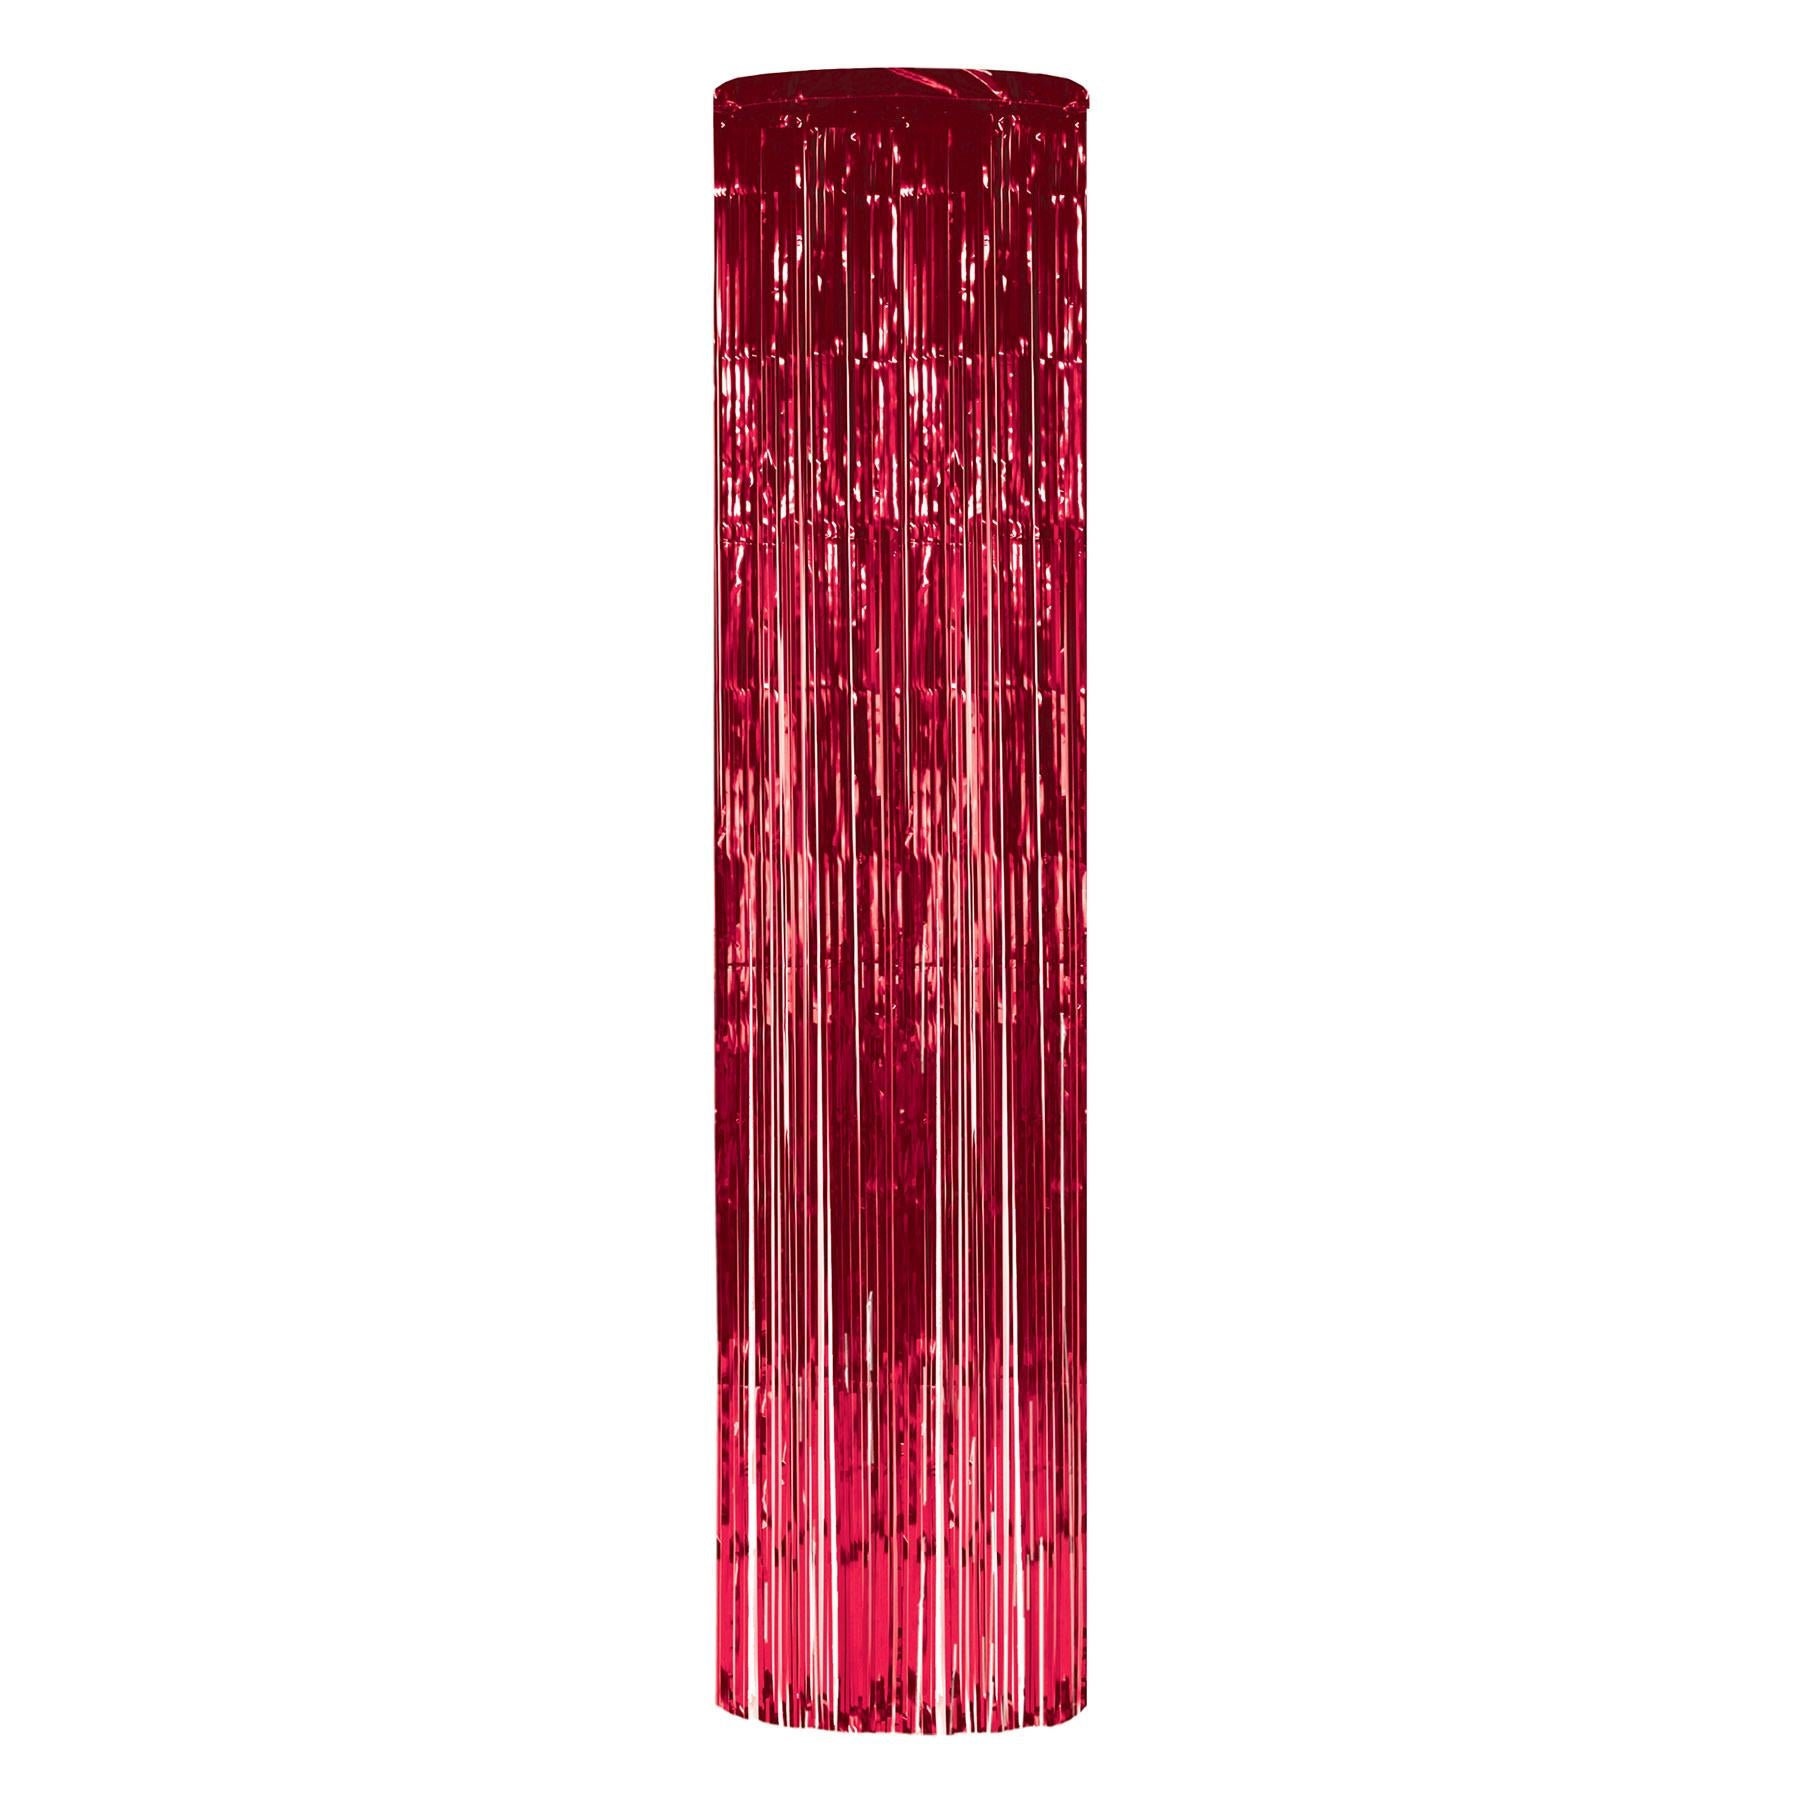 Beistle 1-Ply Gleam 'N Party Column - red